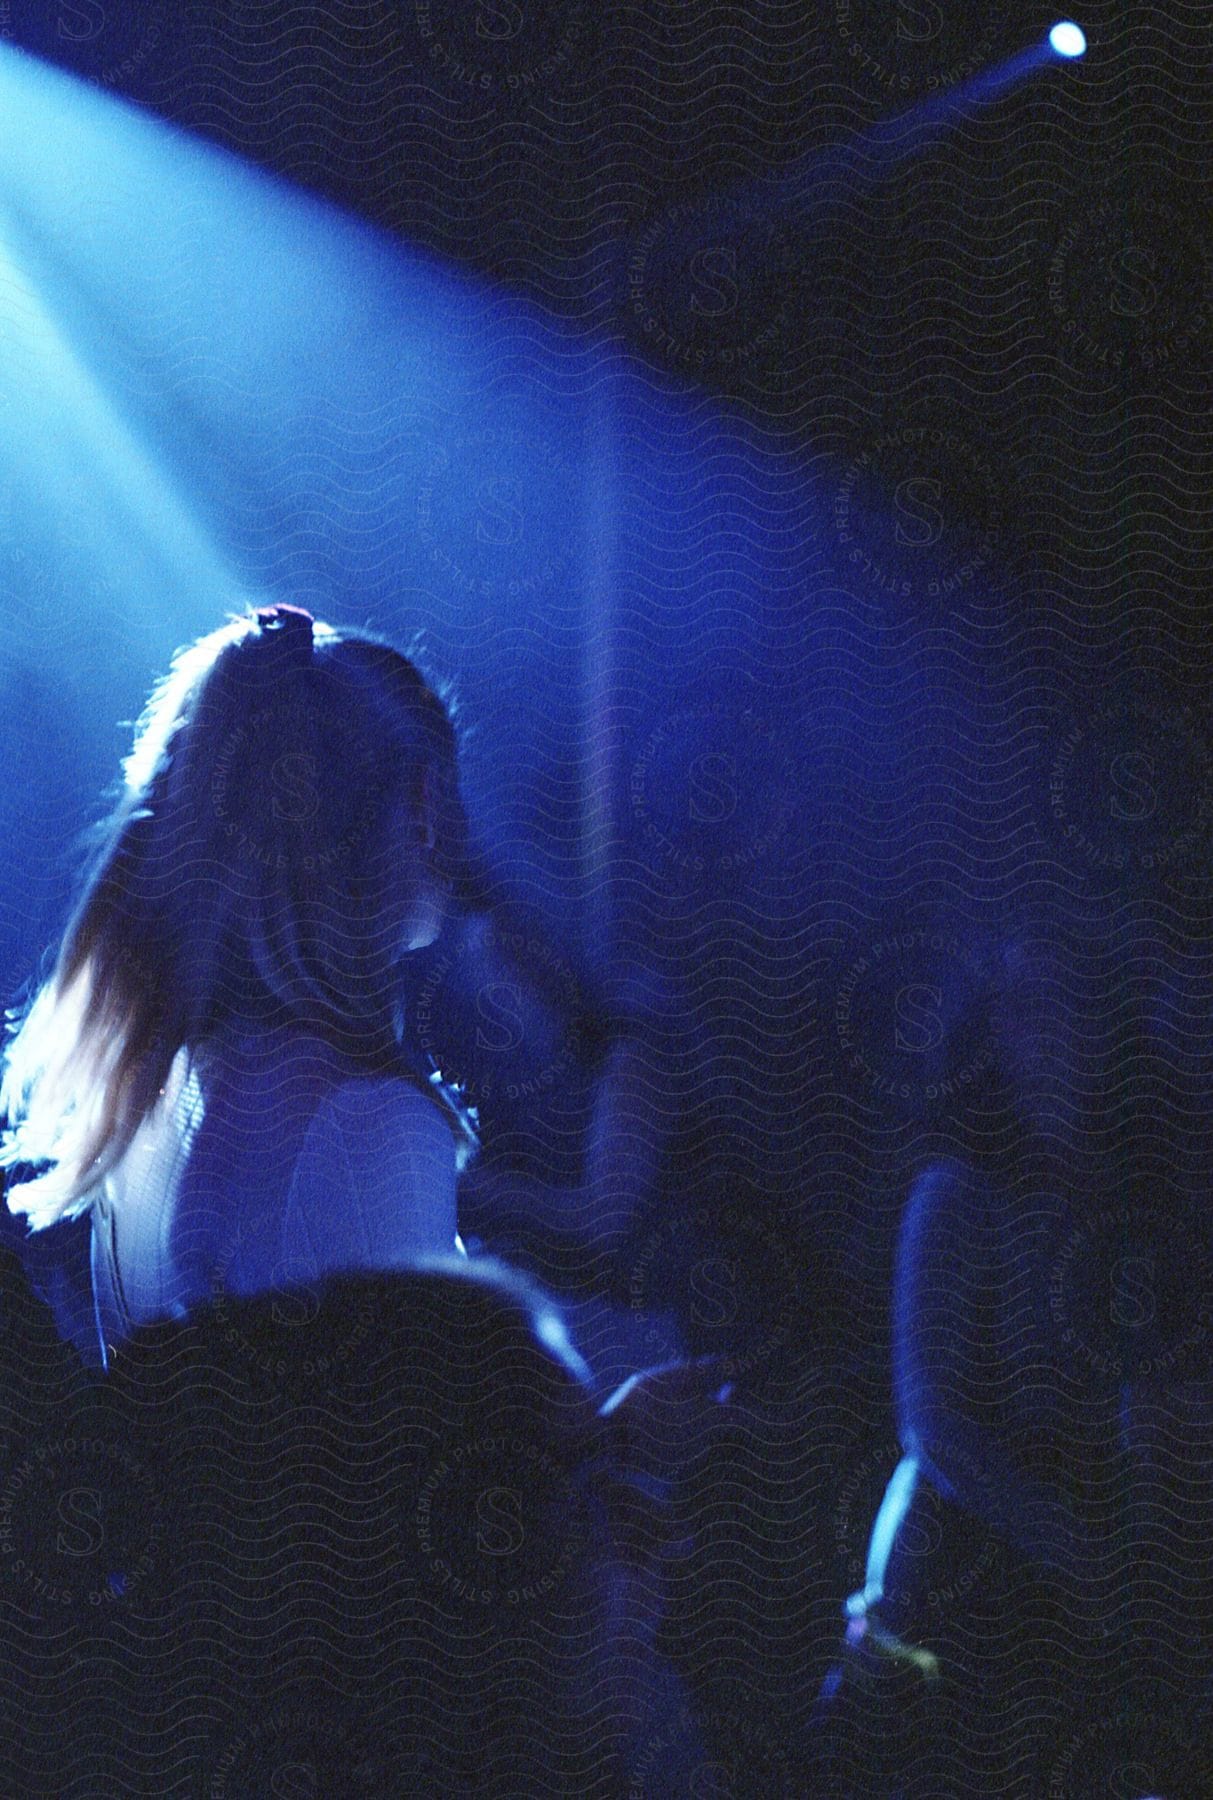 A young blonde woman playing in a band at a concert with a spotlight shining on her